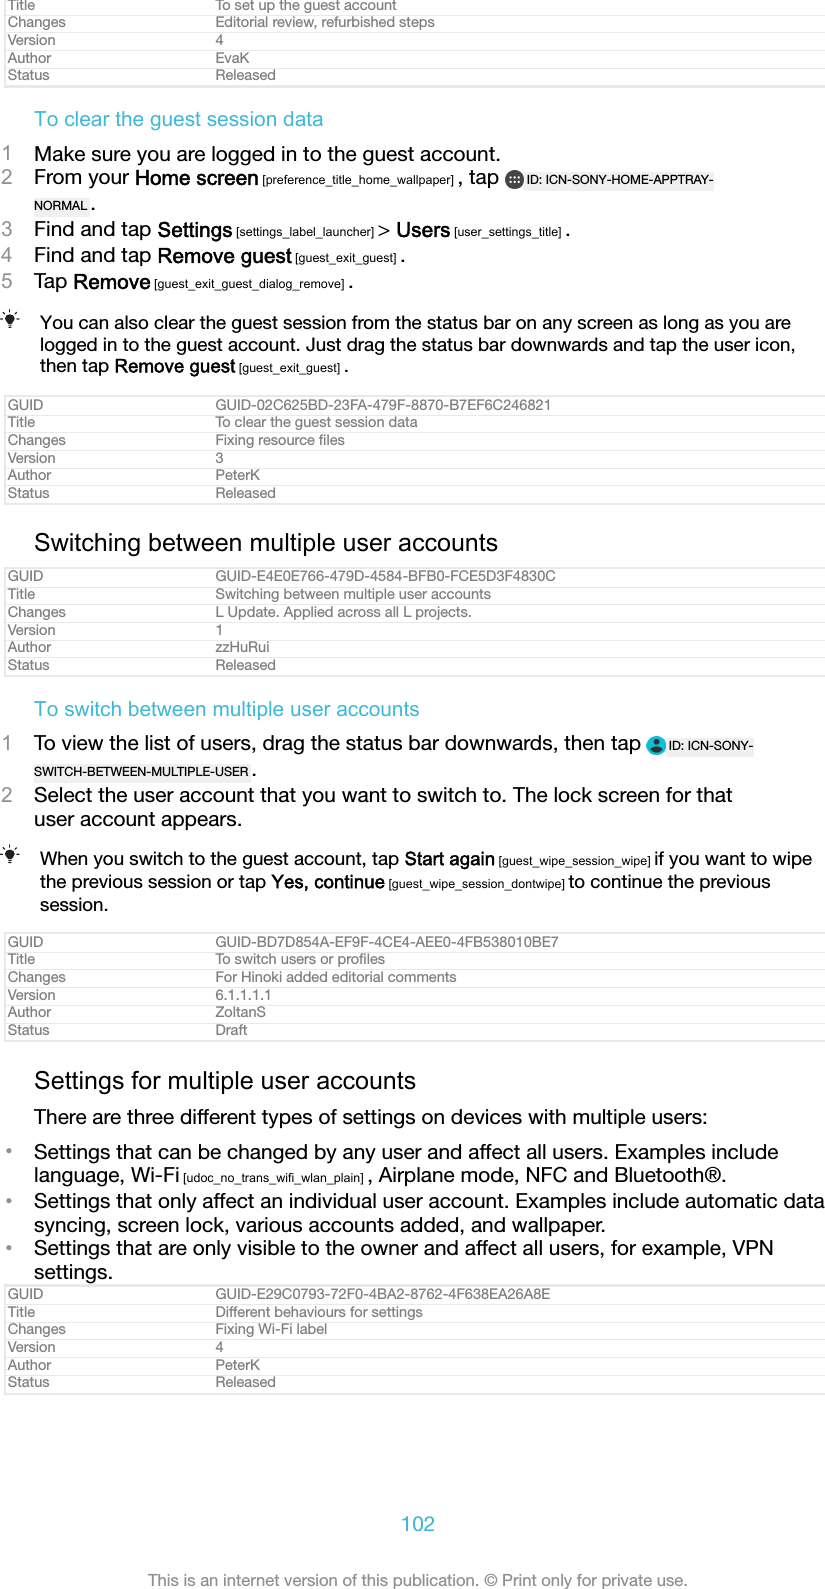 Title To set up the guest accountChanges Editorial review, refurbished stepsVersion 4Author EvaKStatus ReleasedTo clear the guest session data1Make sure you are logged in to the guest account.2From your Home screen [preference_title_home_wallpaper] , tap  ID: ICN-SONY-HOME-APPTRAY-NORMAL .3Find and tap Settings [settings_label_launcher] &gt; Users [user_settings_title] .4Find and tap Remove guest [guest_exit_guest] .5Tap Remove [guest_exit_guest_dialog_remove] .You can also clear the guest session from the status bar on any screen as long as you arelogged in to the guest account. Just drag the status bar downwards and tap the user icon,then tap Remove guest [guest_exit_guest] .GUID GUID-02C625BD-23FA-479F-8870-B7EF6C246821Title To clear the guest session dataChanges Fixing resource ﬁlesVersion 3Author PeterKStatus ReleasedSwitching between multiple user accountsGUID GUID-E4E0E766-479D-4584-BFB0-FCE5D3F4830CTitle Switching between multiple user accountsChanges L Update. Applied across all L projects.Version 1Author zzHuRuiStatus ReleasedTo switch between multiple user accounts1To view the list of users, drag the status bar downwards, then tap  ID: ICN-SONY-SWITCH-BETWEEN-MULTIPLE-USER .2Select the user account that you want to switch to. The lock screen for thatuser account appears.When you switch to the guest account, tap Start again [guest_wipe_session_wipe] if you want to wipethe previous session or tap Yes, continue [guest_wipe_session_dontwipe] to continue the previoussession.GUID GUID-BD7D854A-EF9F-4CE4-AEE0-4FB538010BE7Title To switch users or proﬁlesChanges For Hinoki added editorial commentsVersion 6.1.1.1.1Author ZoltanSStatus DraftSettings for multiple user accountsThere are three different types of settings on devices with multiple users:•Settings that can be changed by any user and affect all users. Examples includelanguage, Wi-Fi [udoc_no_trans_wifi_wlan_plain] , Airplane mode, NFC and Bluetooth®.•Settings that only affect an individual user account. Examples include automatic datasyncing, screen lock, various accounts added, and wallpaper.•Settings that are only visible to the owner and affect all users, for example, VPNsettings.GUID GUID-E29C0793-72F0-4BA2-8762-4F638EA26A8ETitle Different behaviours for settingsChanges Fixing Wi-Fi labelVersion 4Author PeterKStatus Released102This is an internet version of this publication. © Print only for private use.